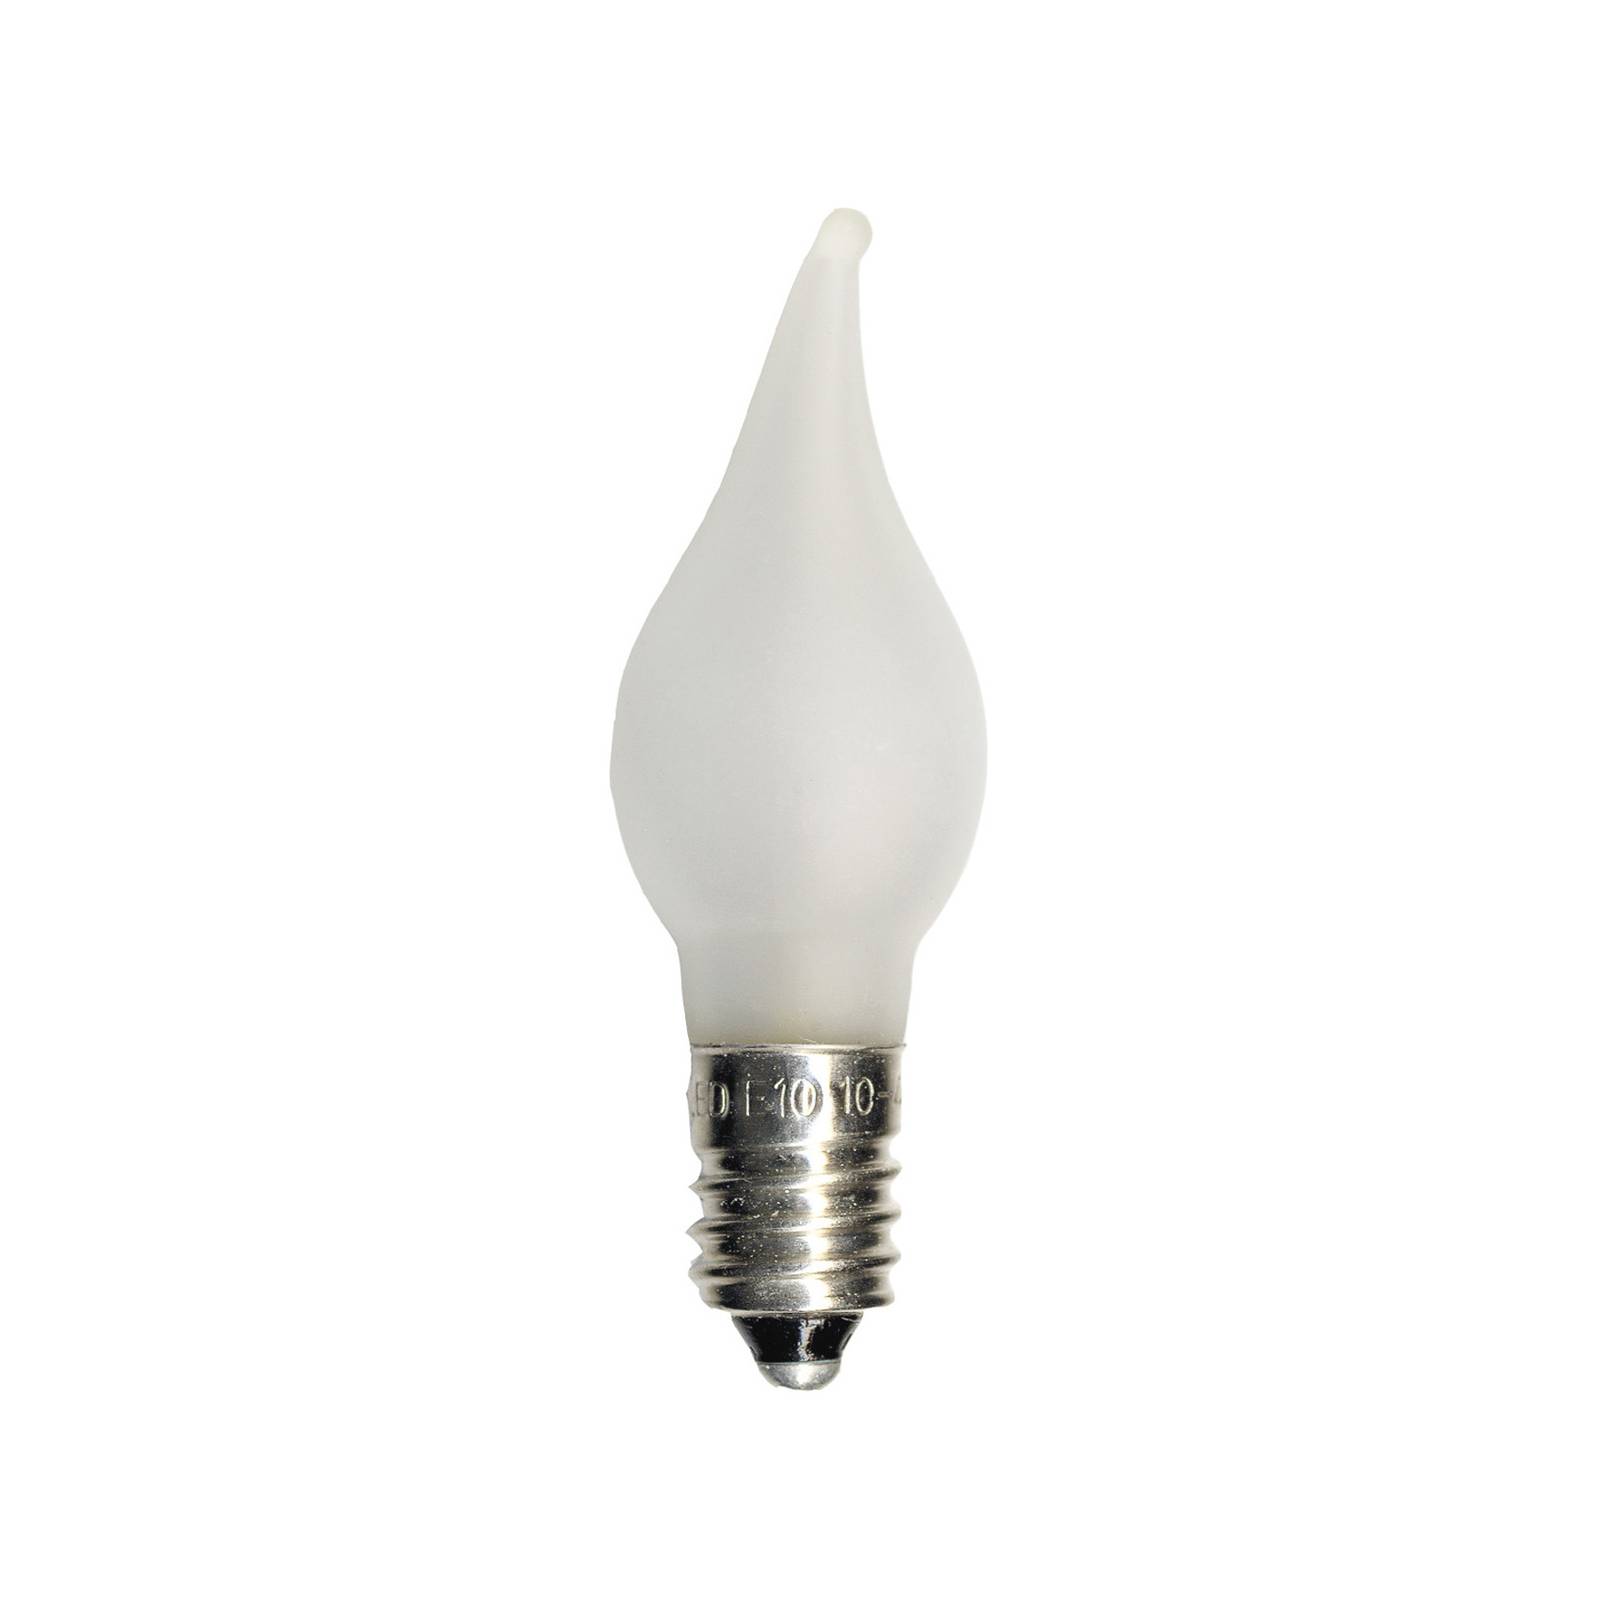 Image of STAR TRADING Ampoule LED E10 0,2 W, 10-55 V x3 flamme 7391482065872